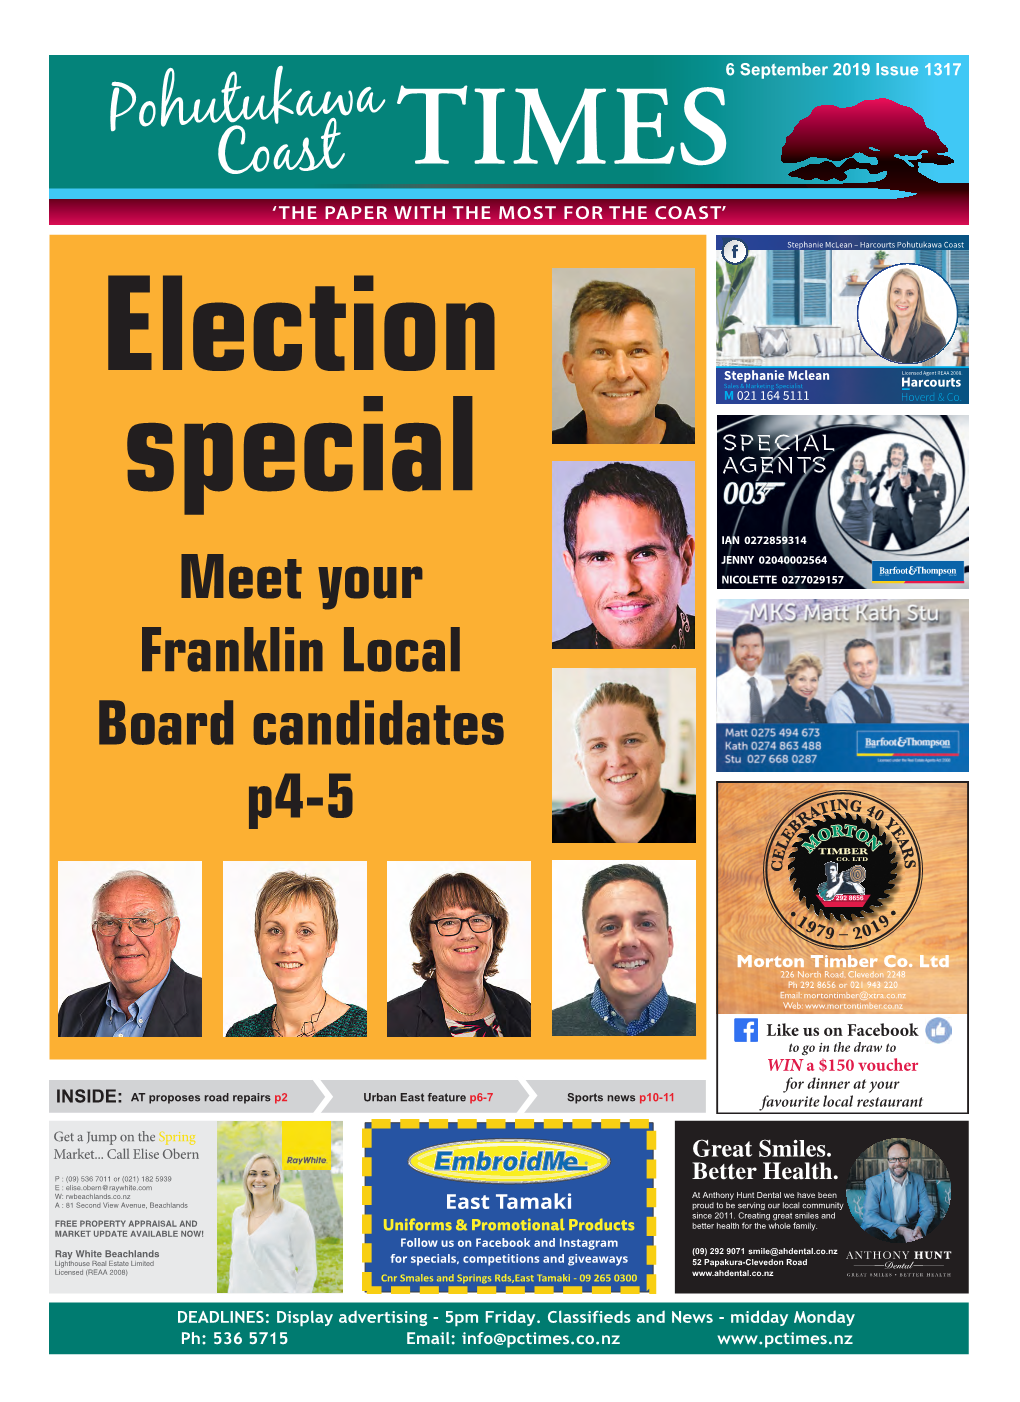 Meet Your Franklin Local Board Candidates P4-5